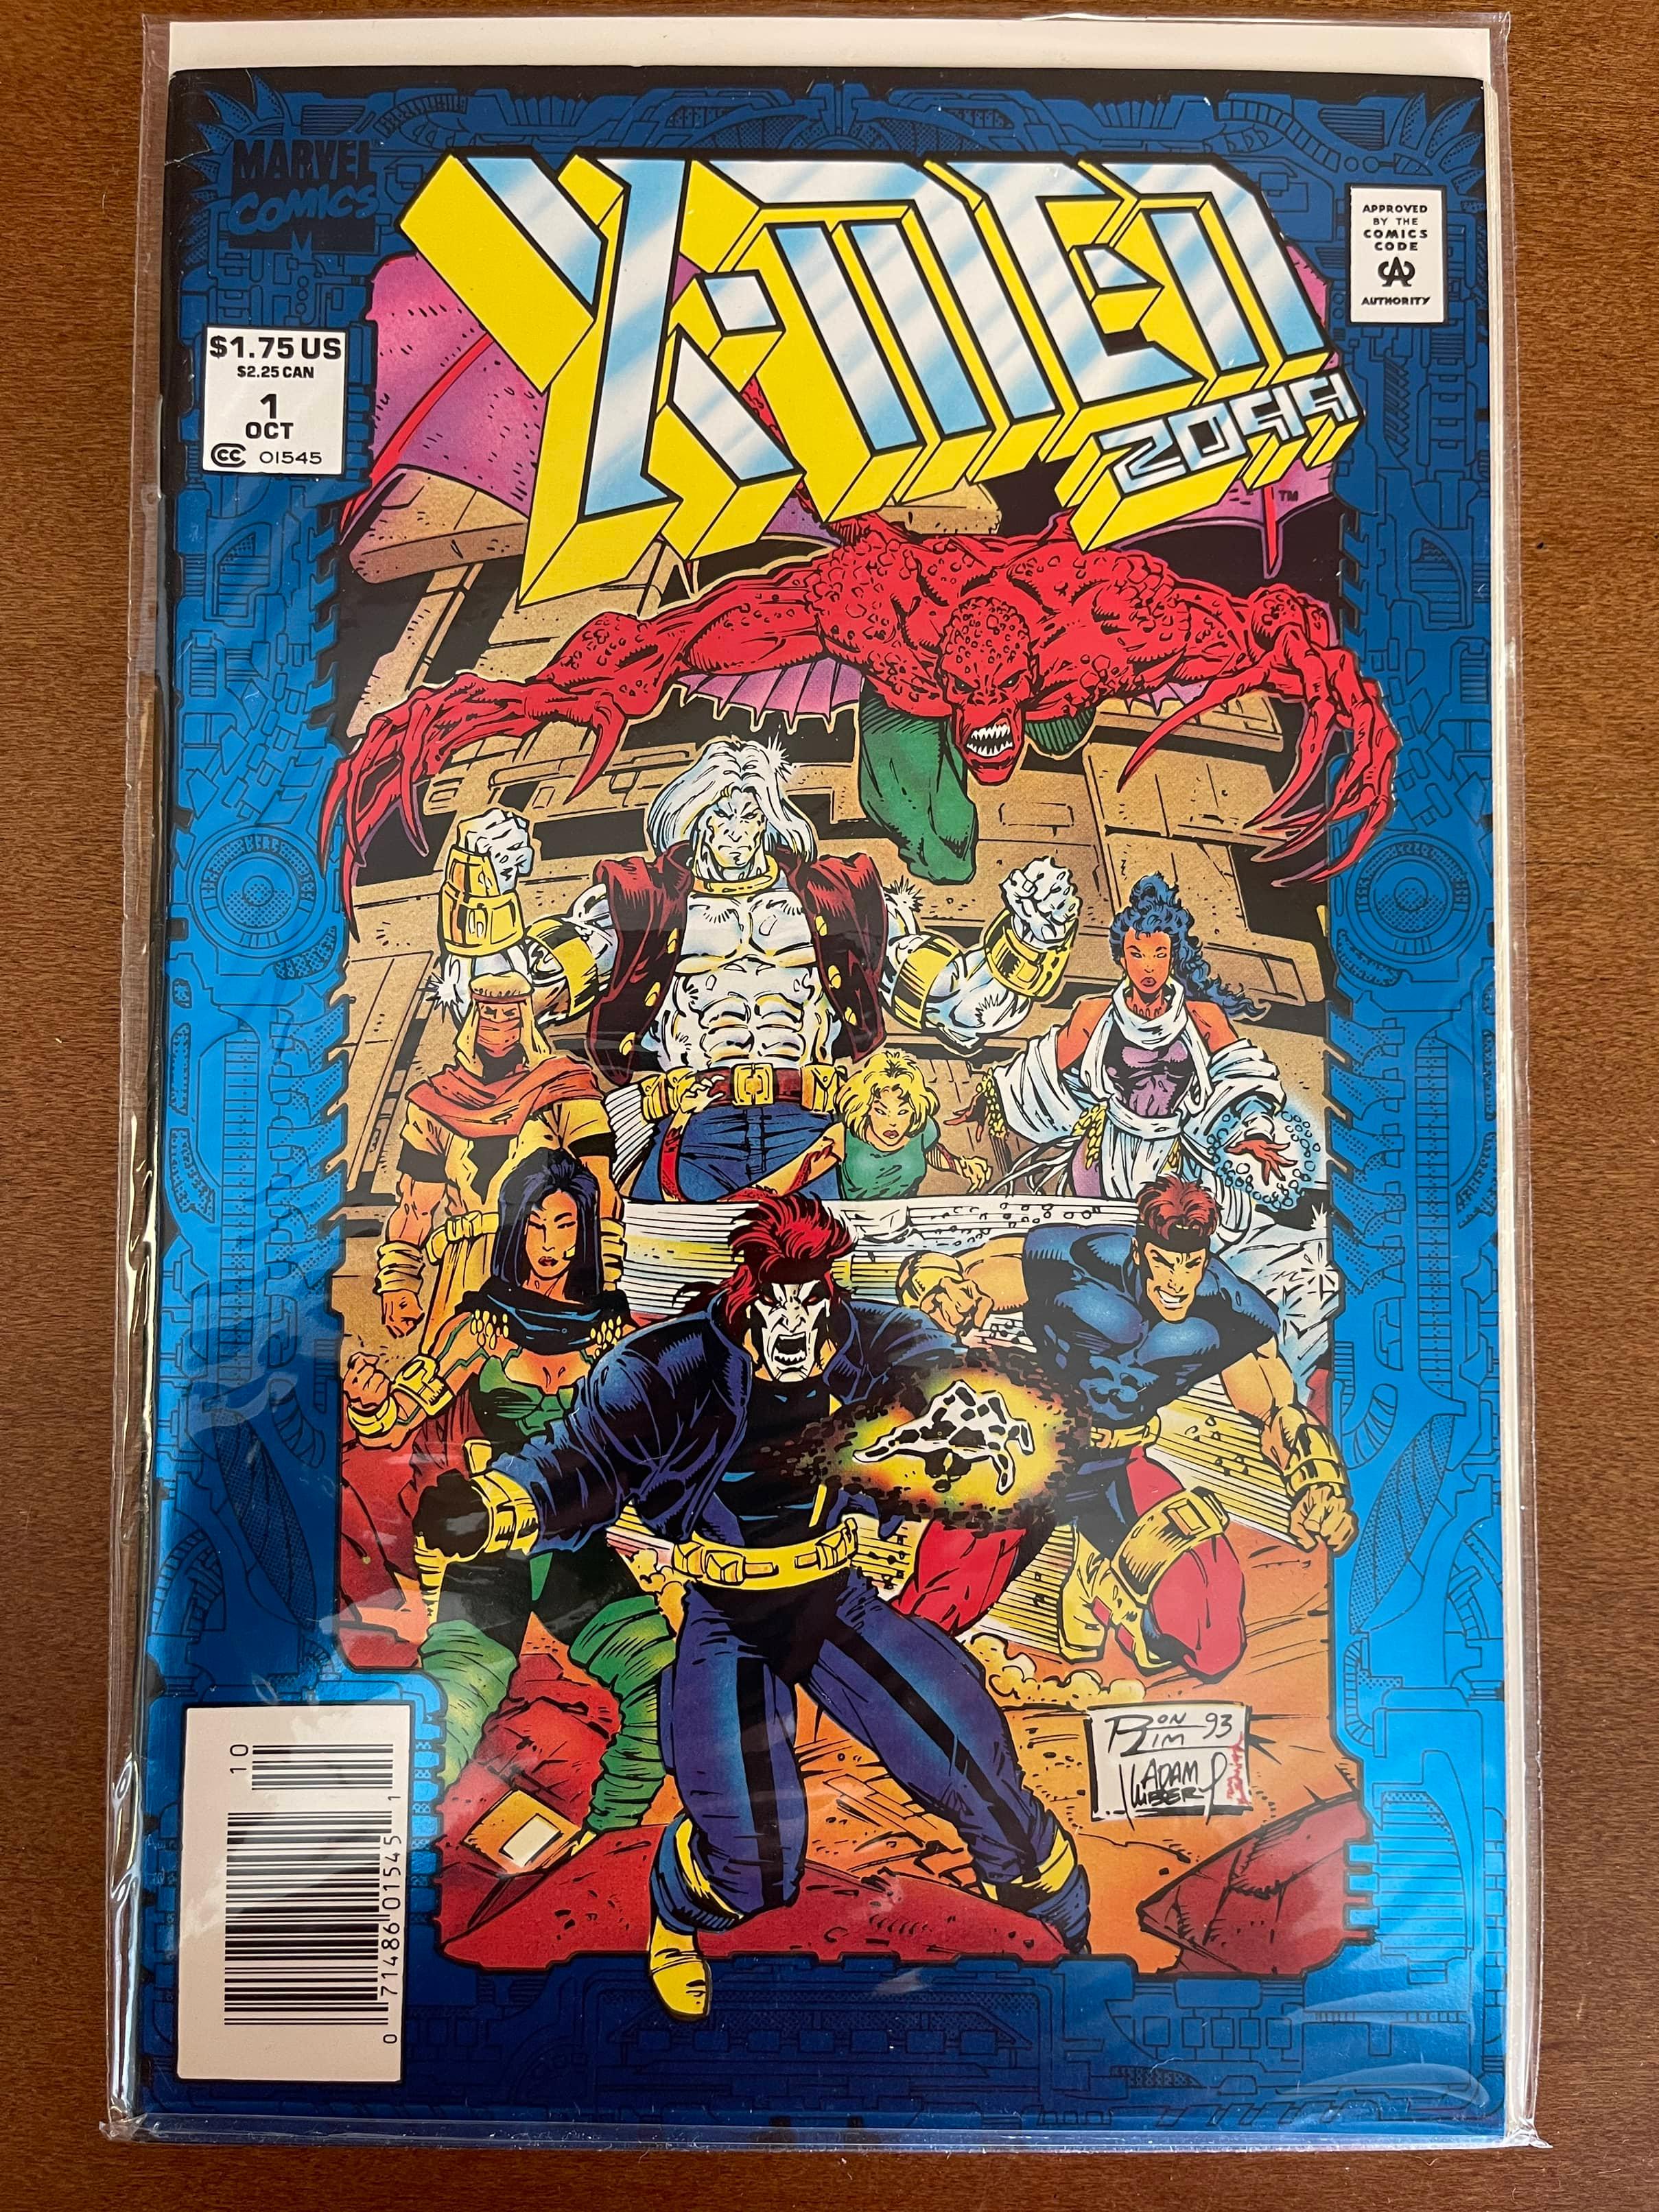 X-Men 2099 Comic #1 Marvel Key 1st team appearance of the X-Men 2099 and First Issue